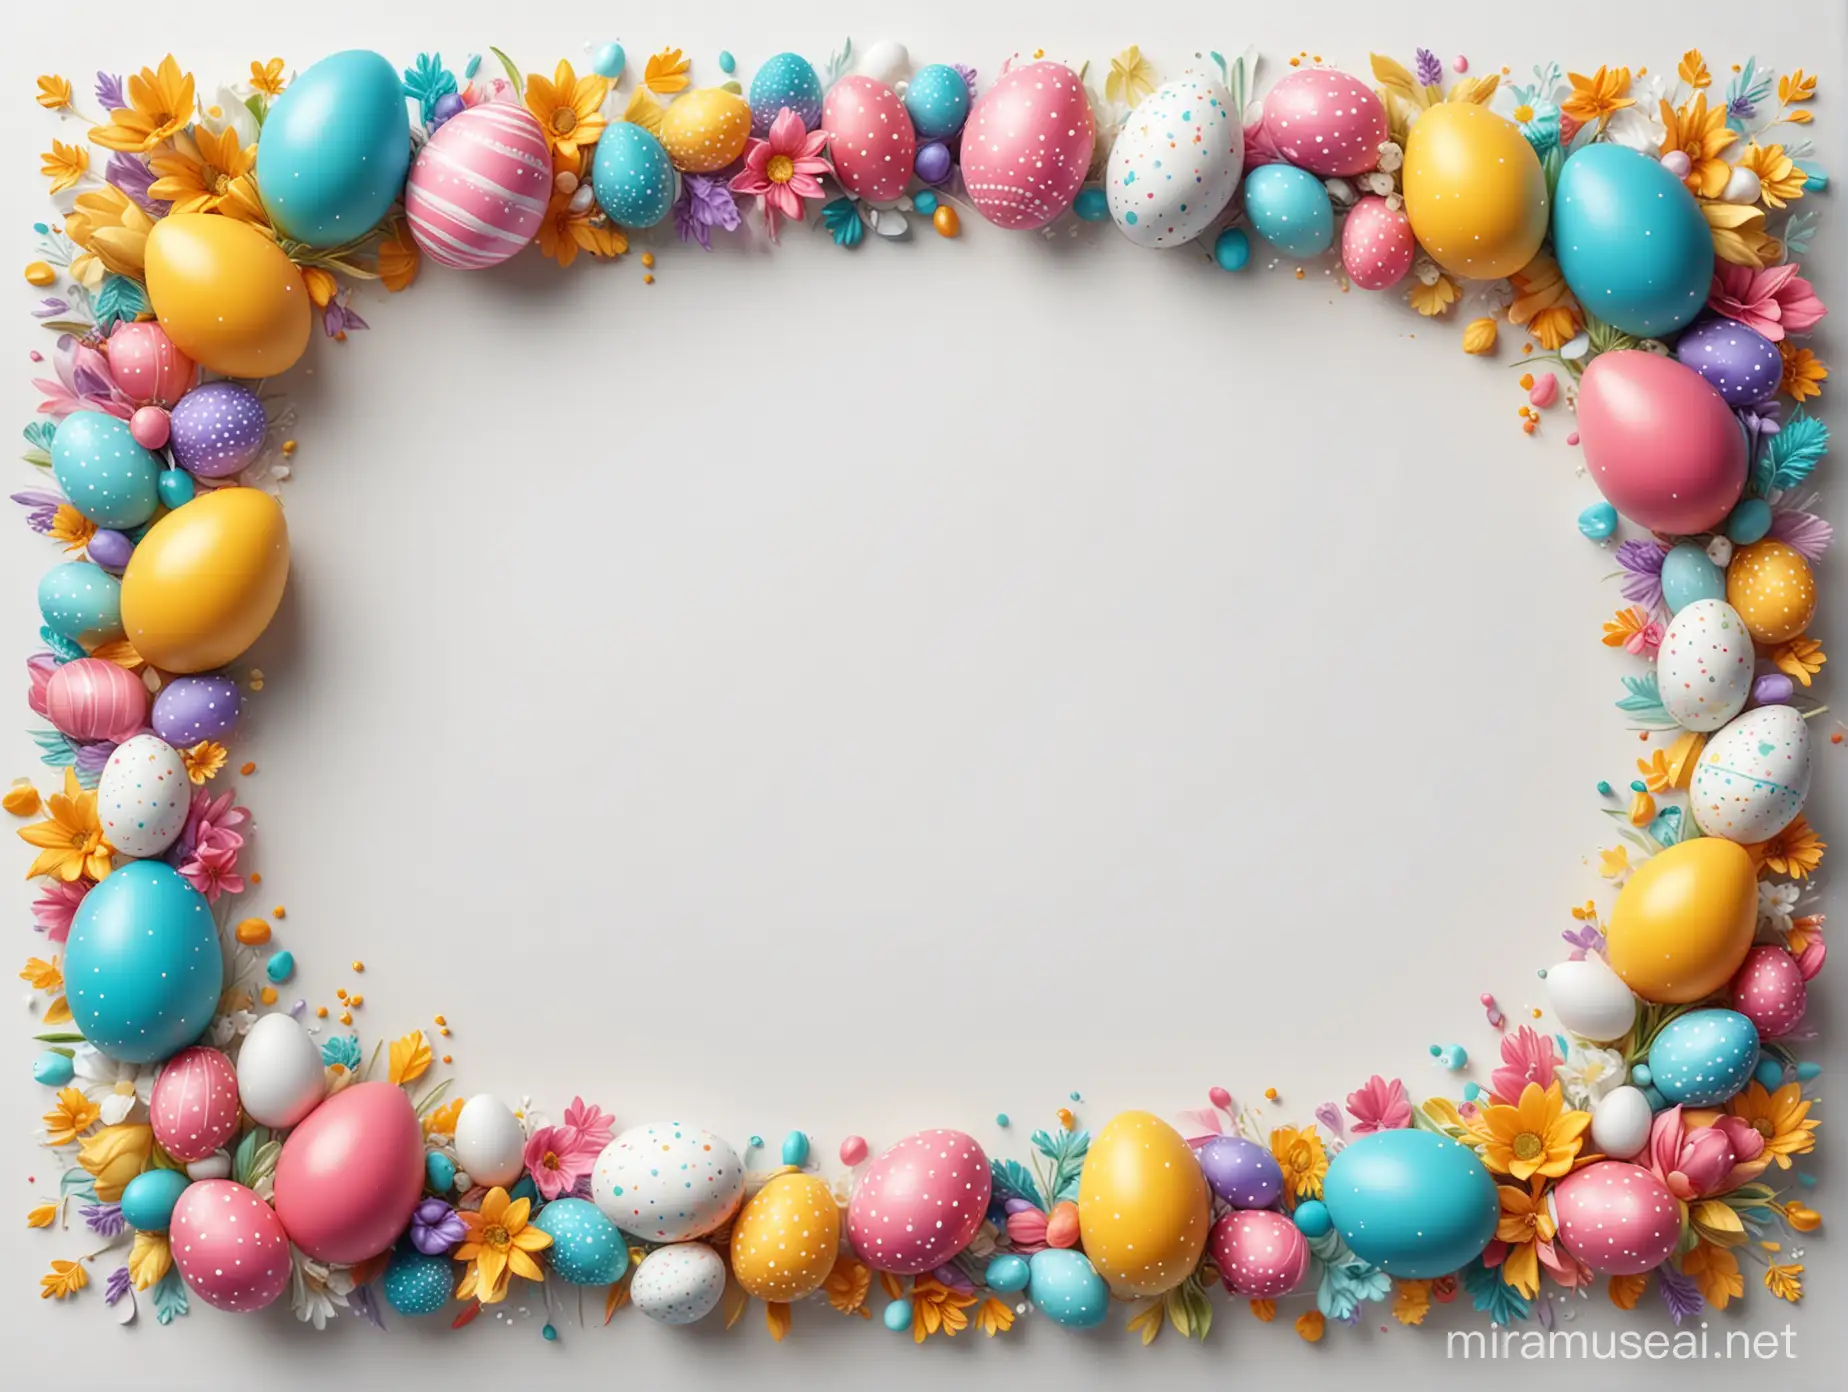 Ultra Realistic 3D Colorful Easter Border on White Background